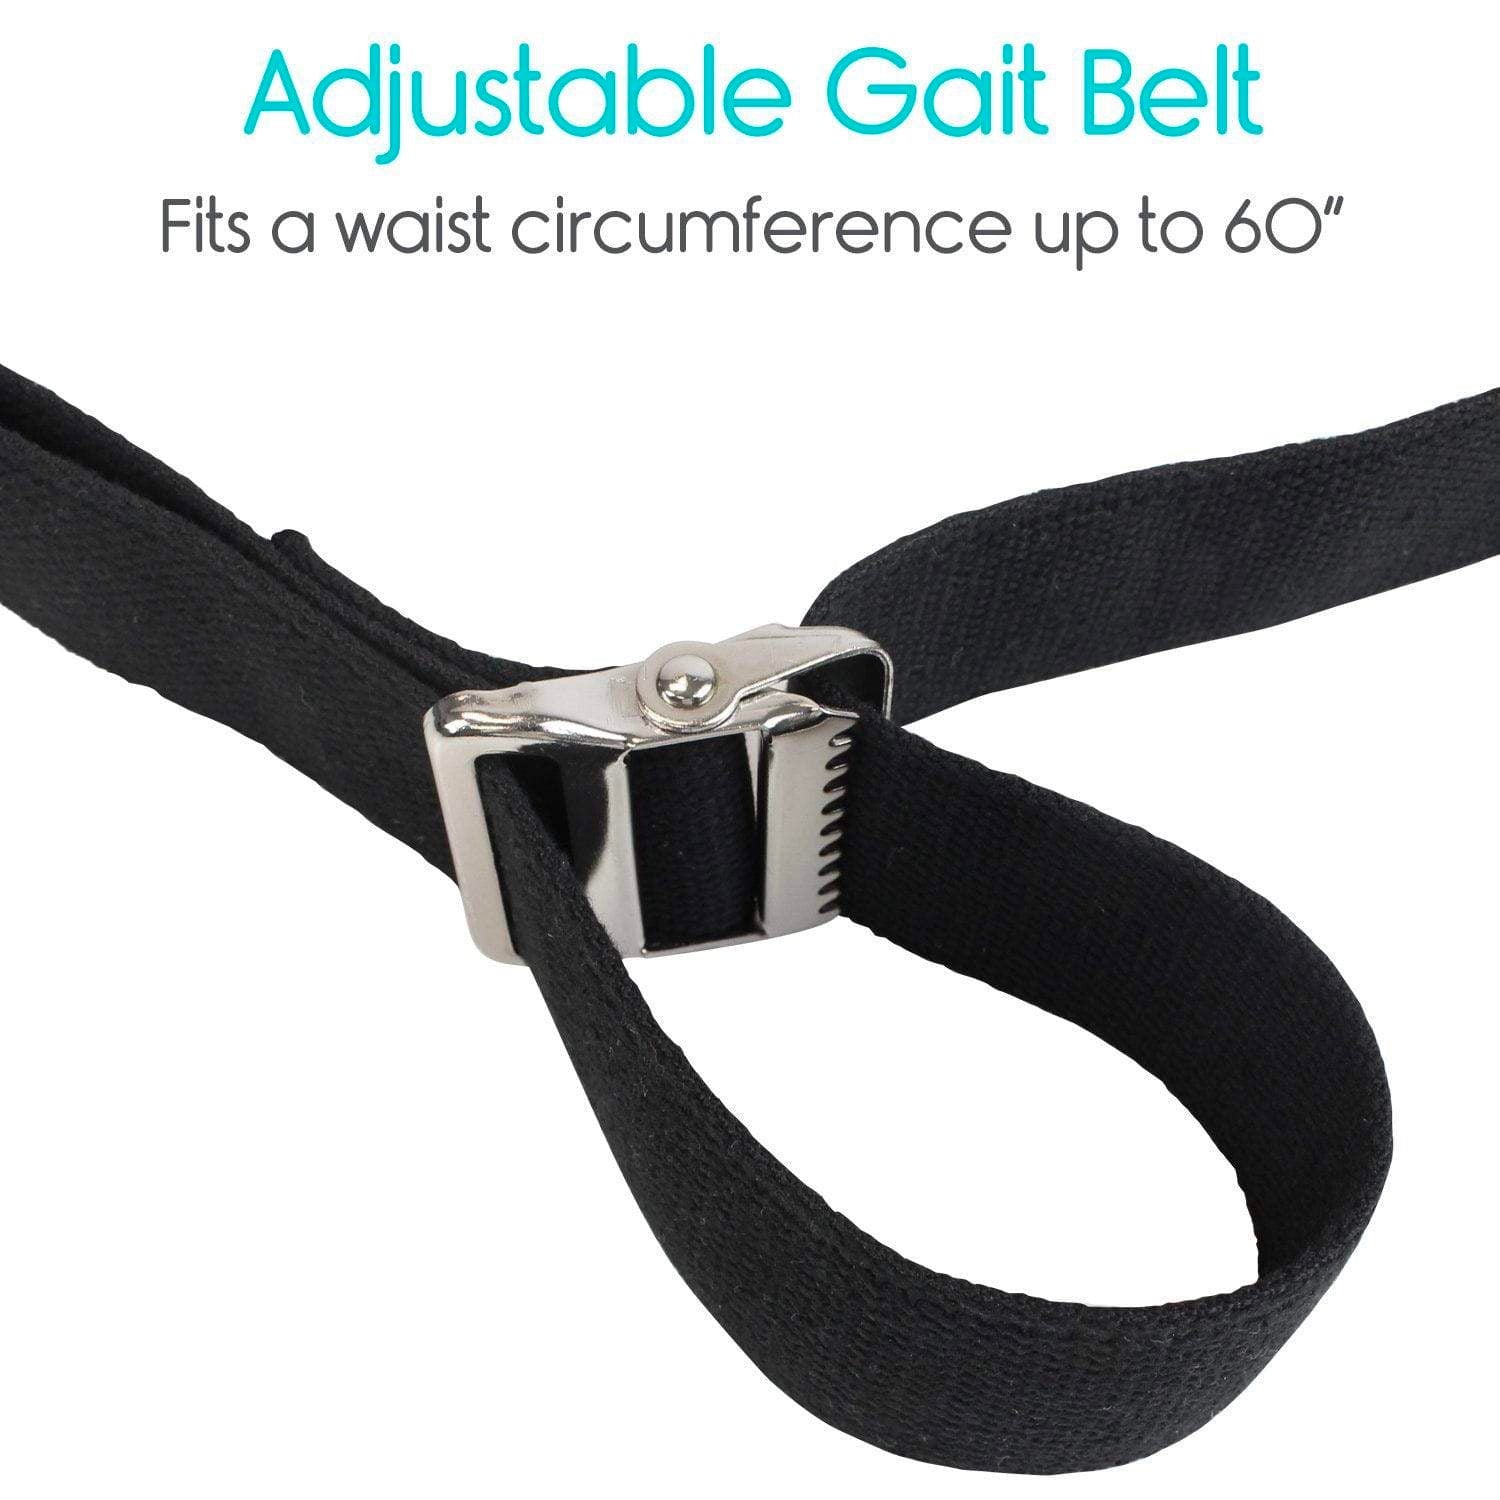 60" gait belt that's adjustable and fits a waist circumference up to 60"